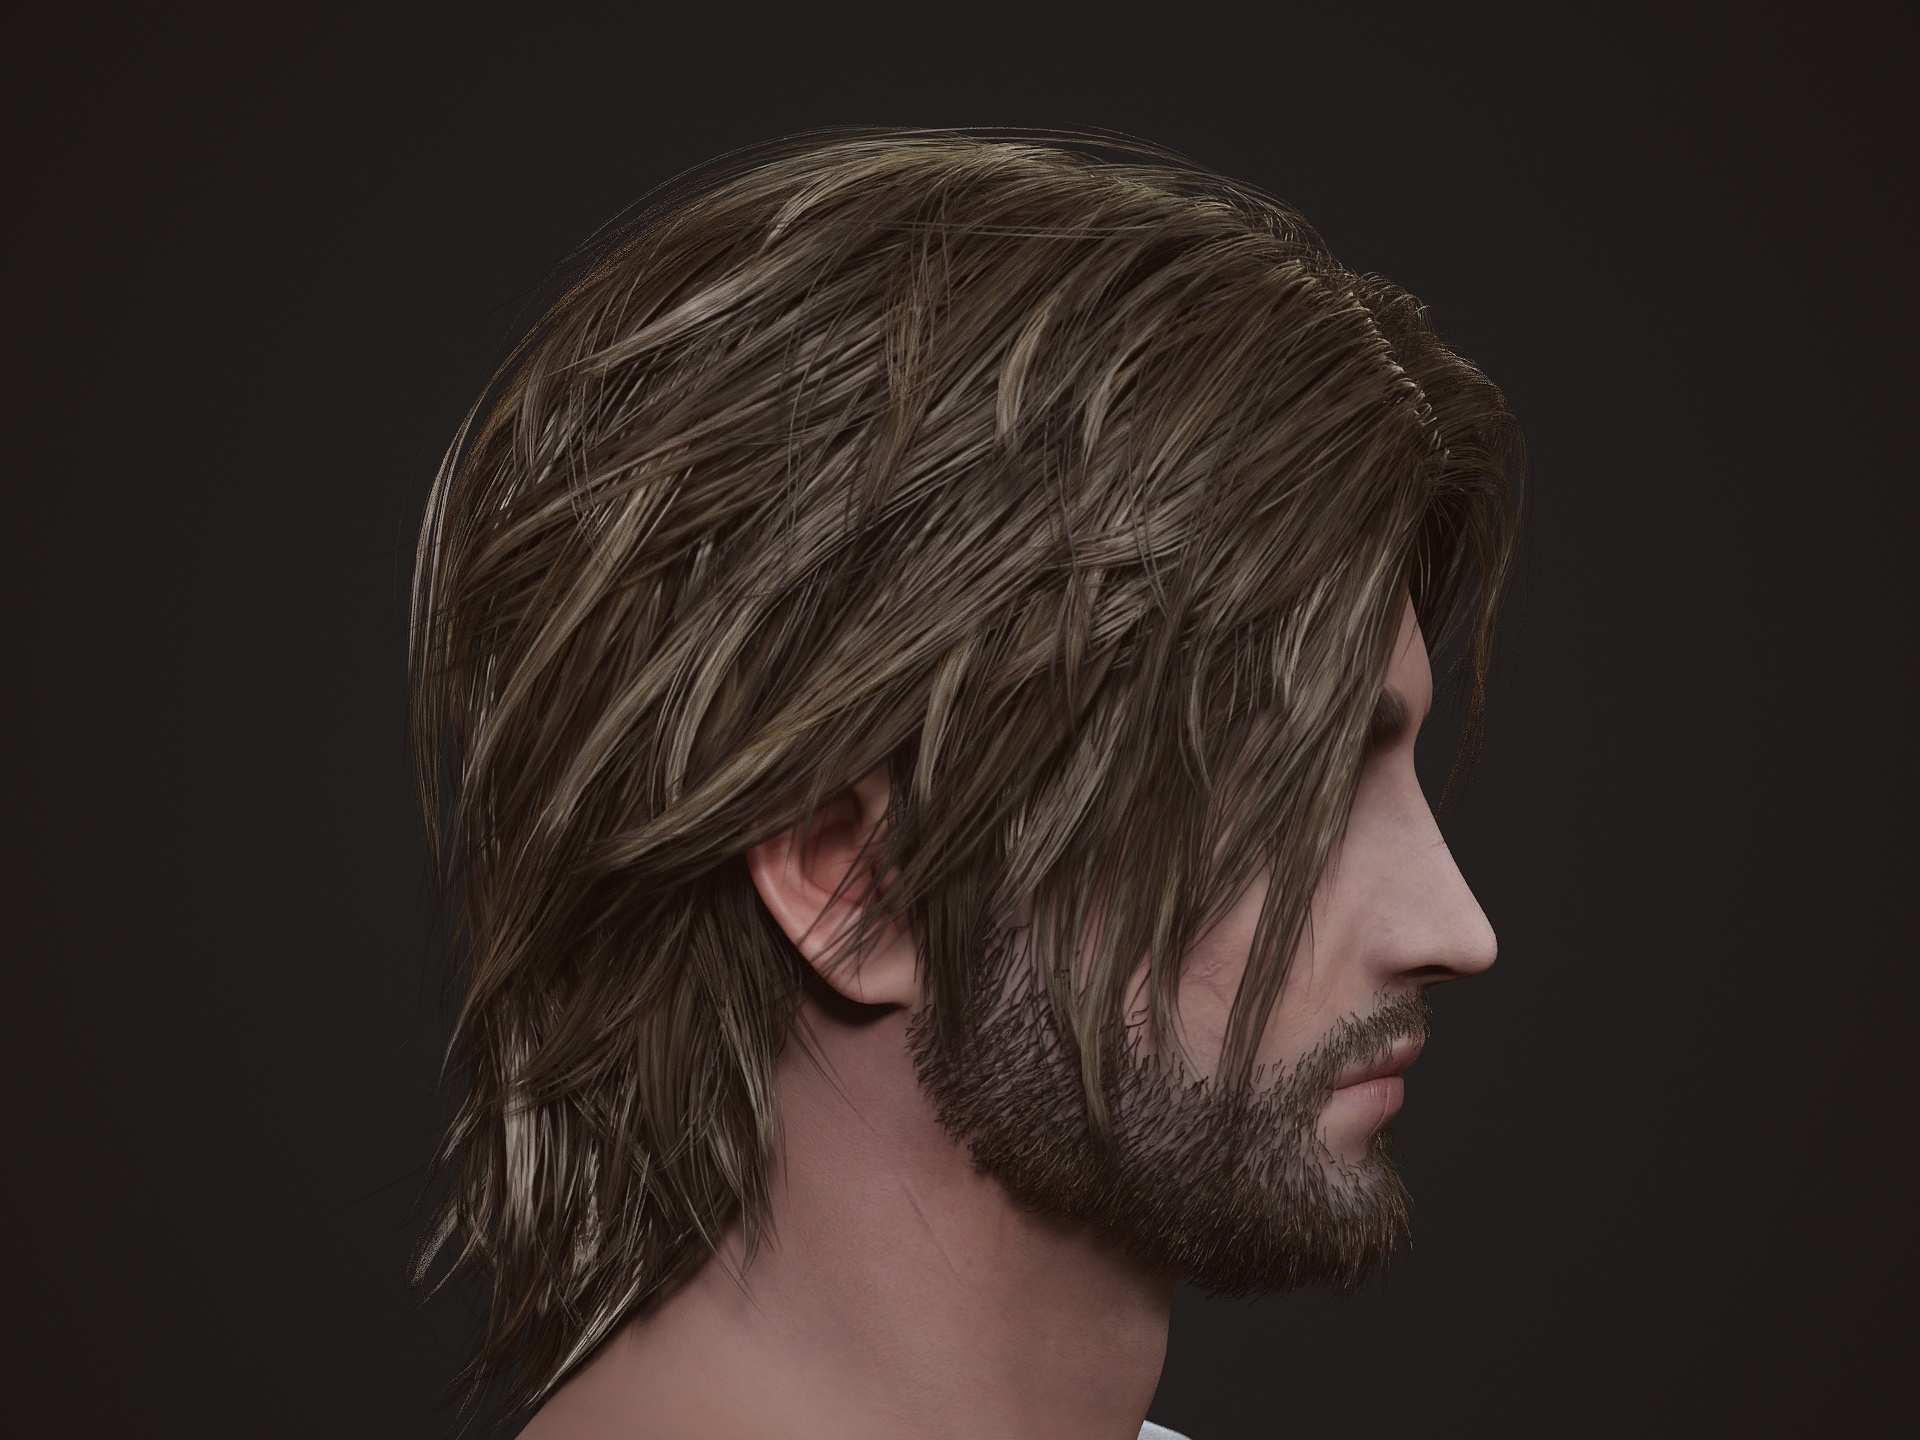 I made his beard with Ornatrix plugin  going to try the same with his hair too but end up just manual hand placing these hair cards all over again 😅